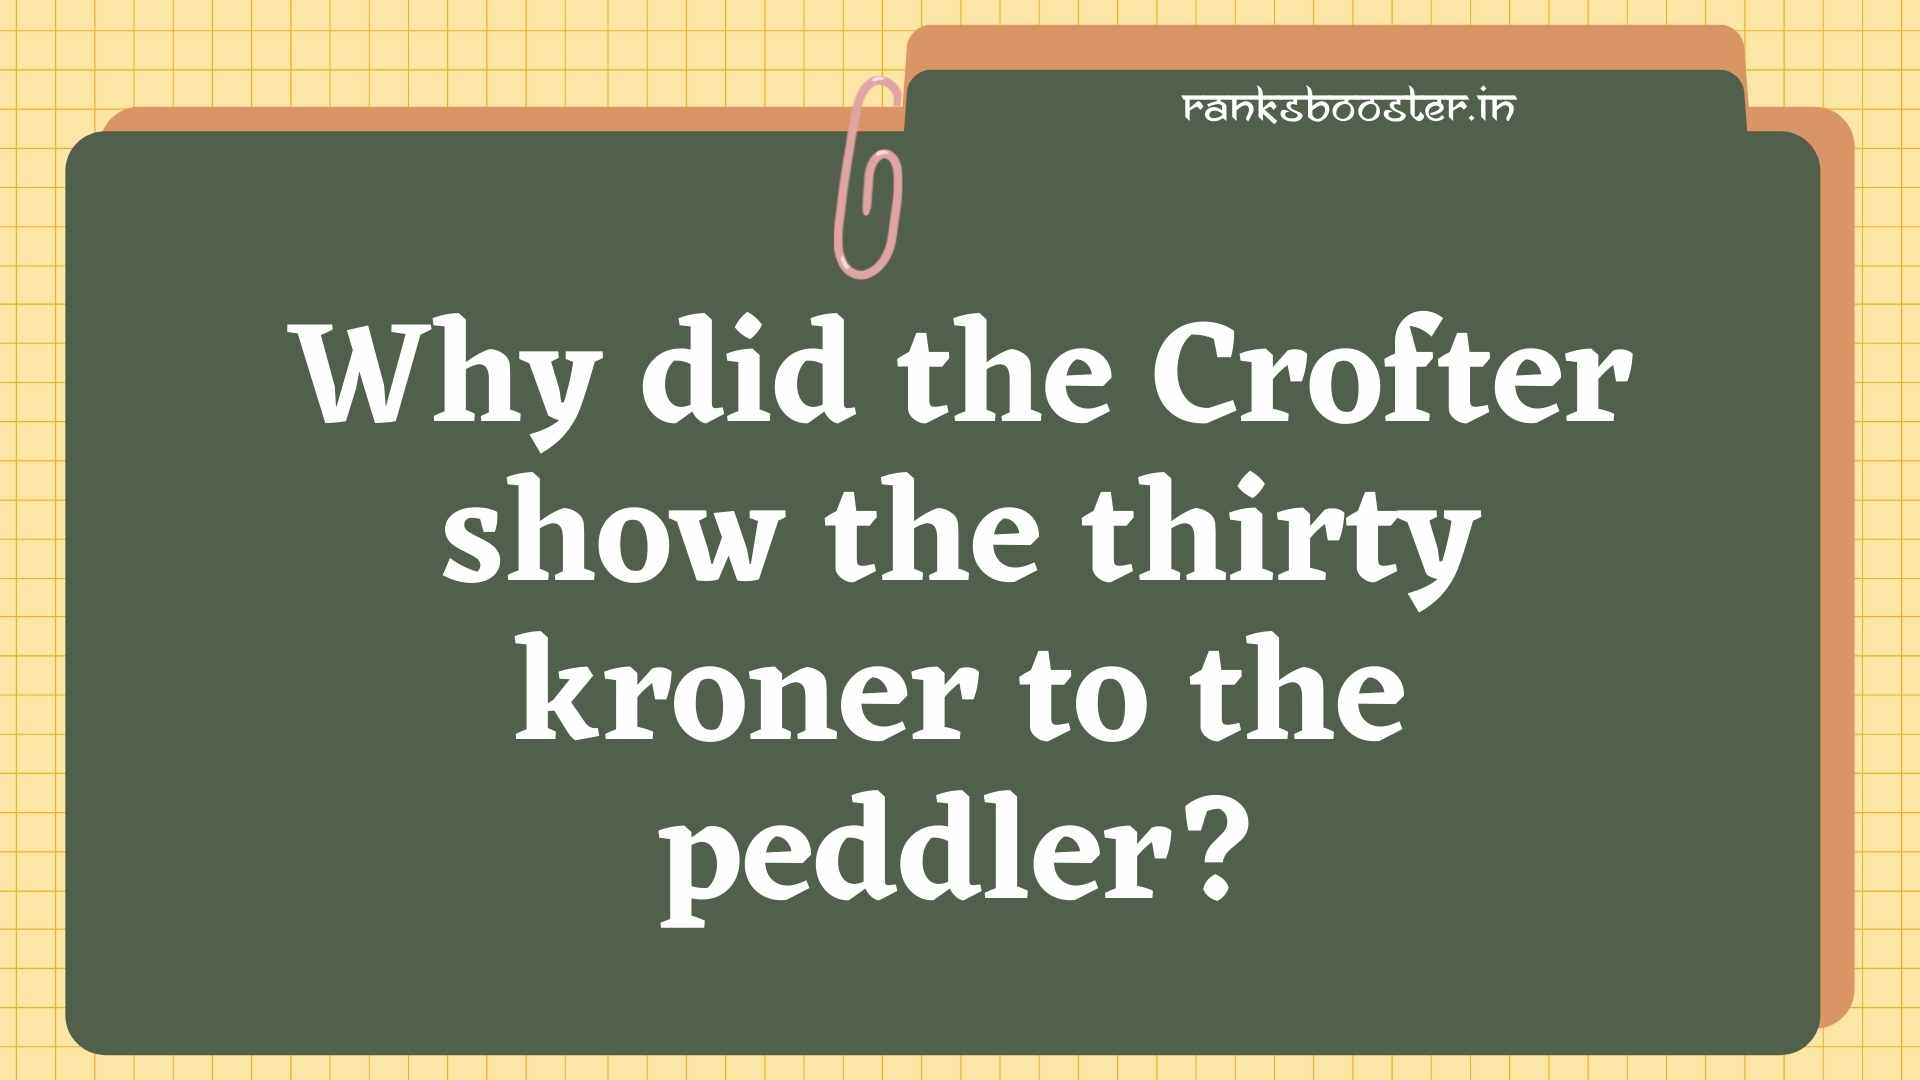 Why did the Crofter show the thirty kroner to the peddler? [CBSE (AI) 2016]